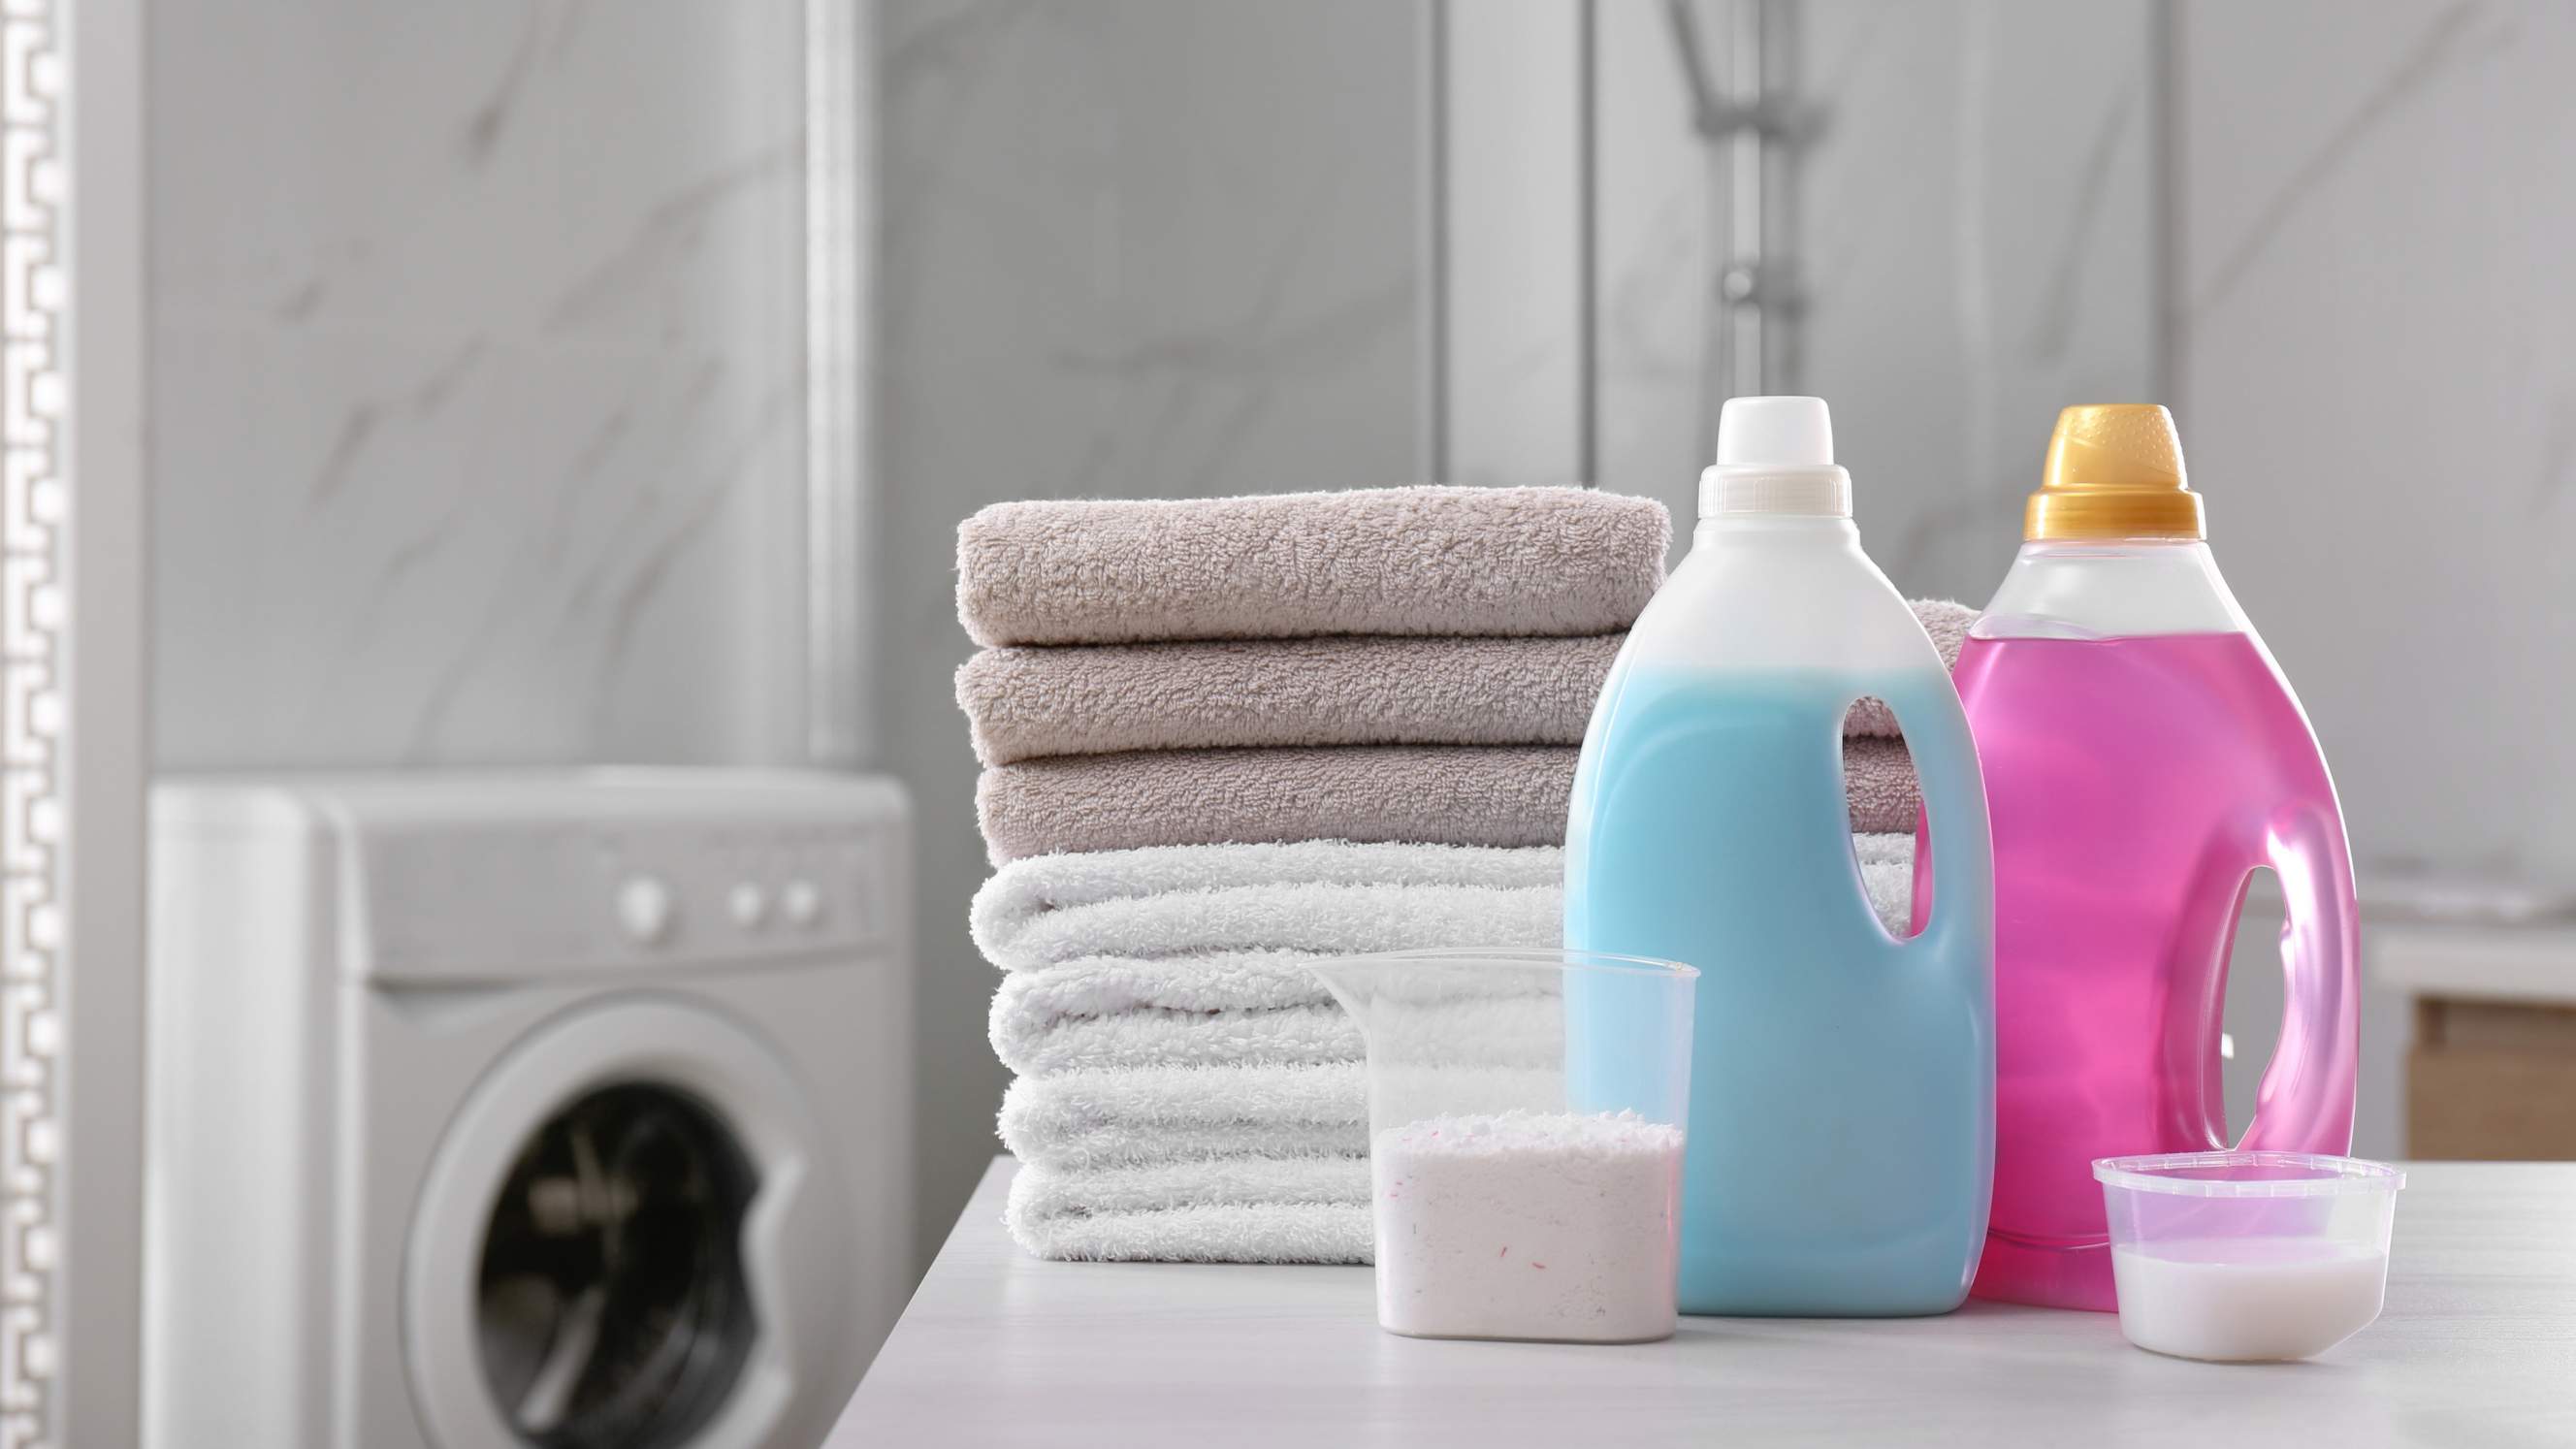 Fabric conditioner vs detergent - Detergent and fabric softener with stack of folded towels on white table in bathroom